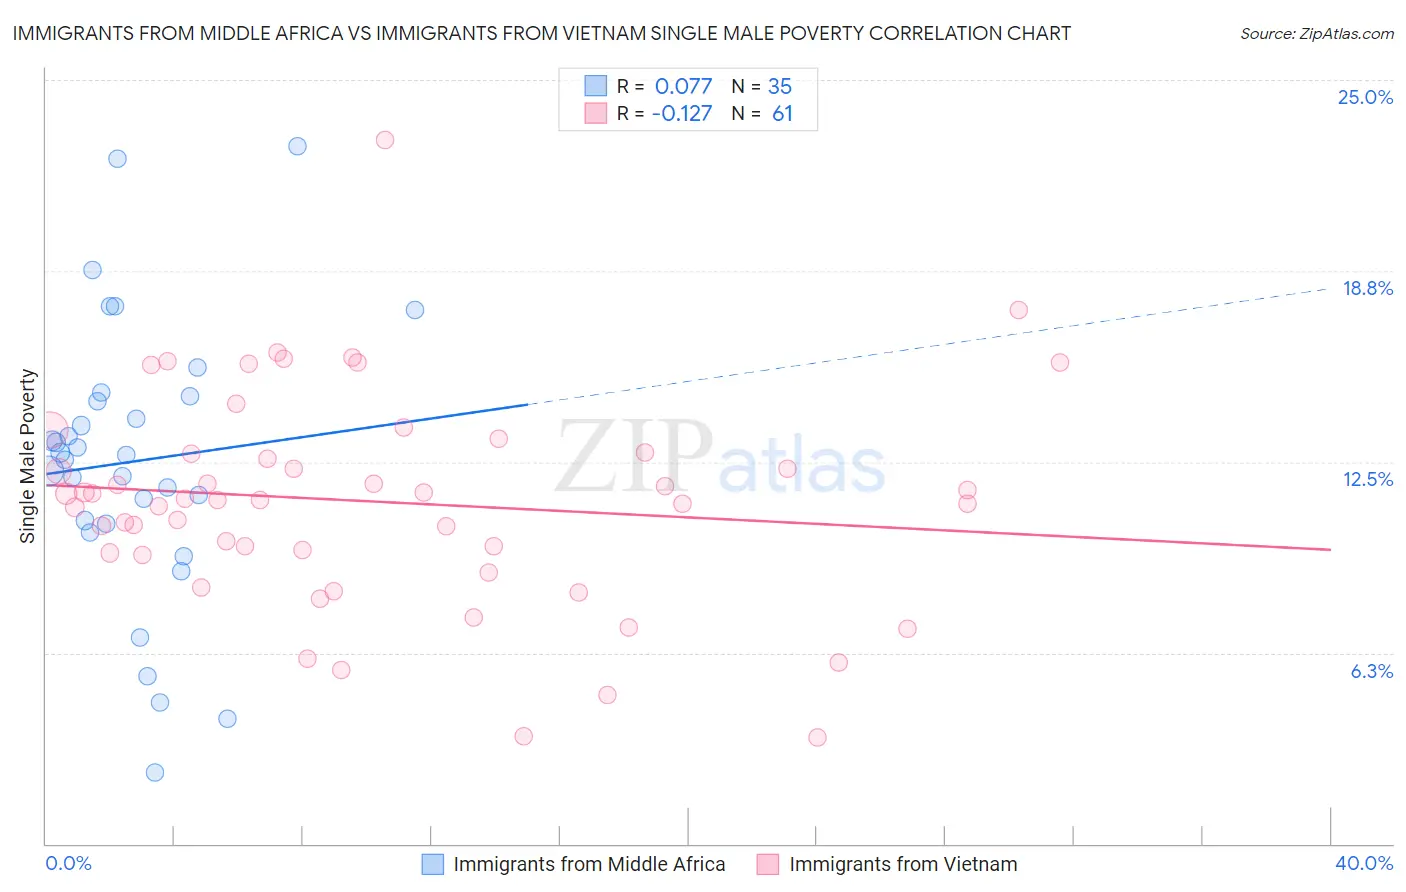 Immigrants from Middle Africa vs Immigrants from Vietnam Single Male Poverty